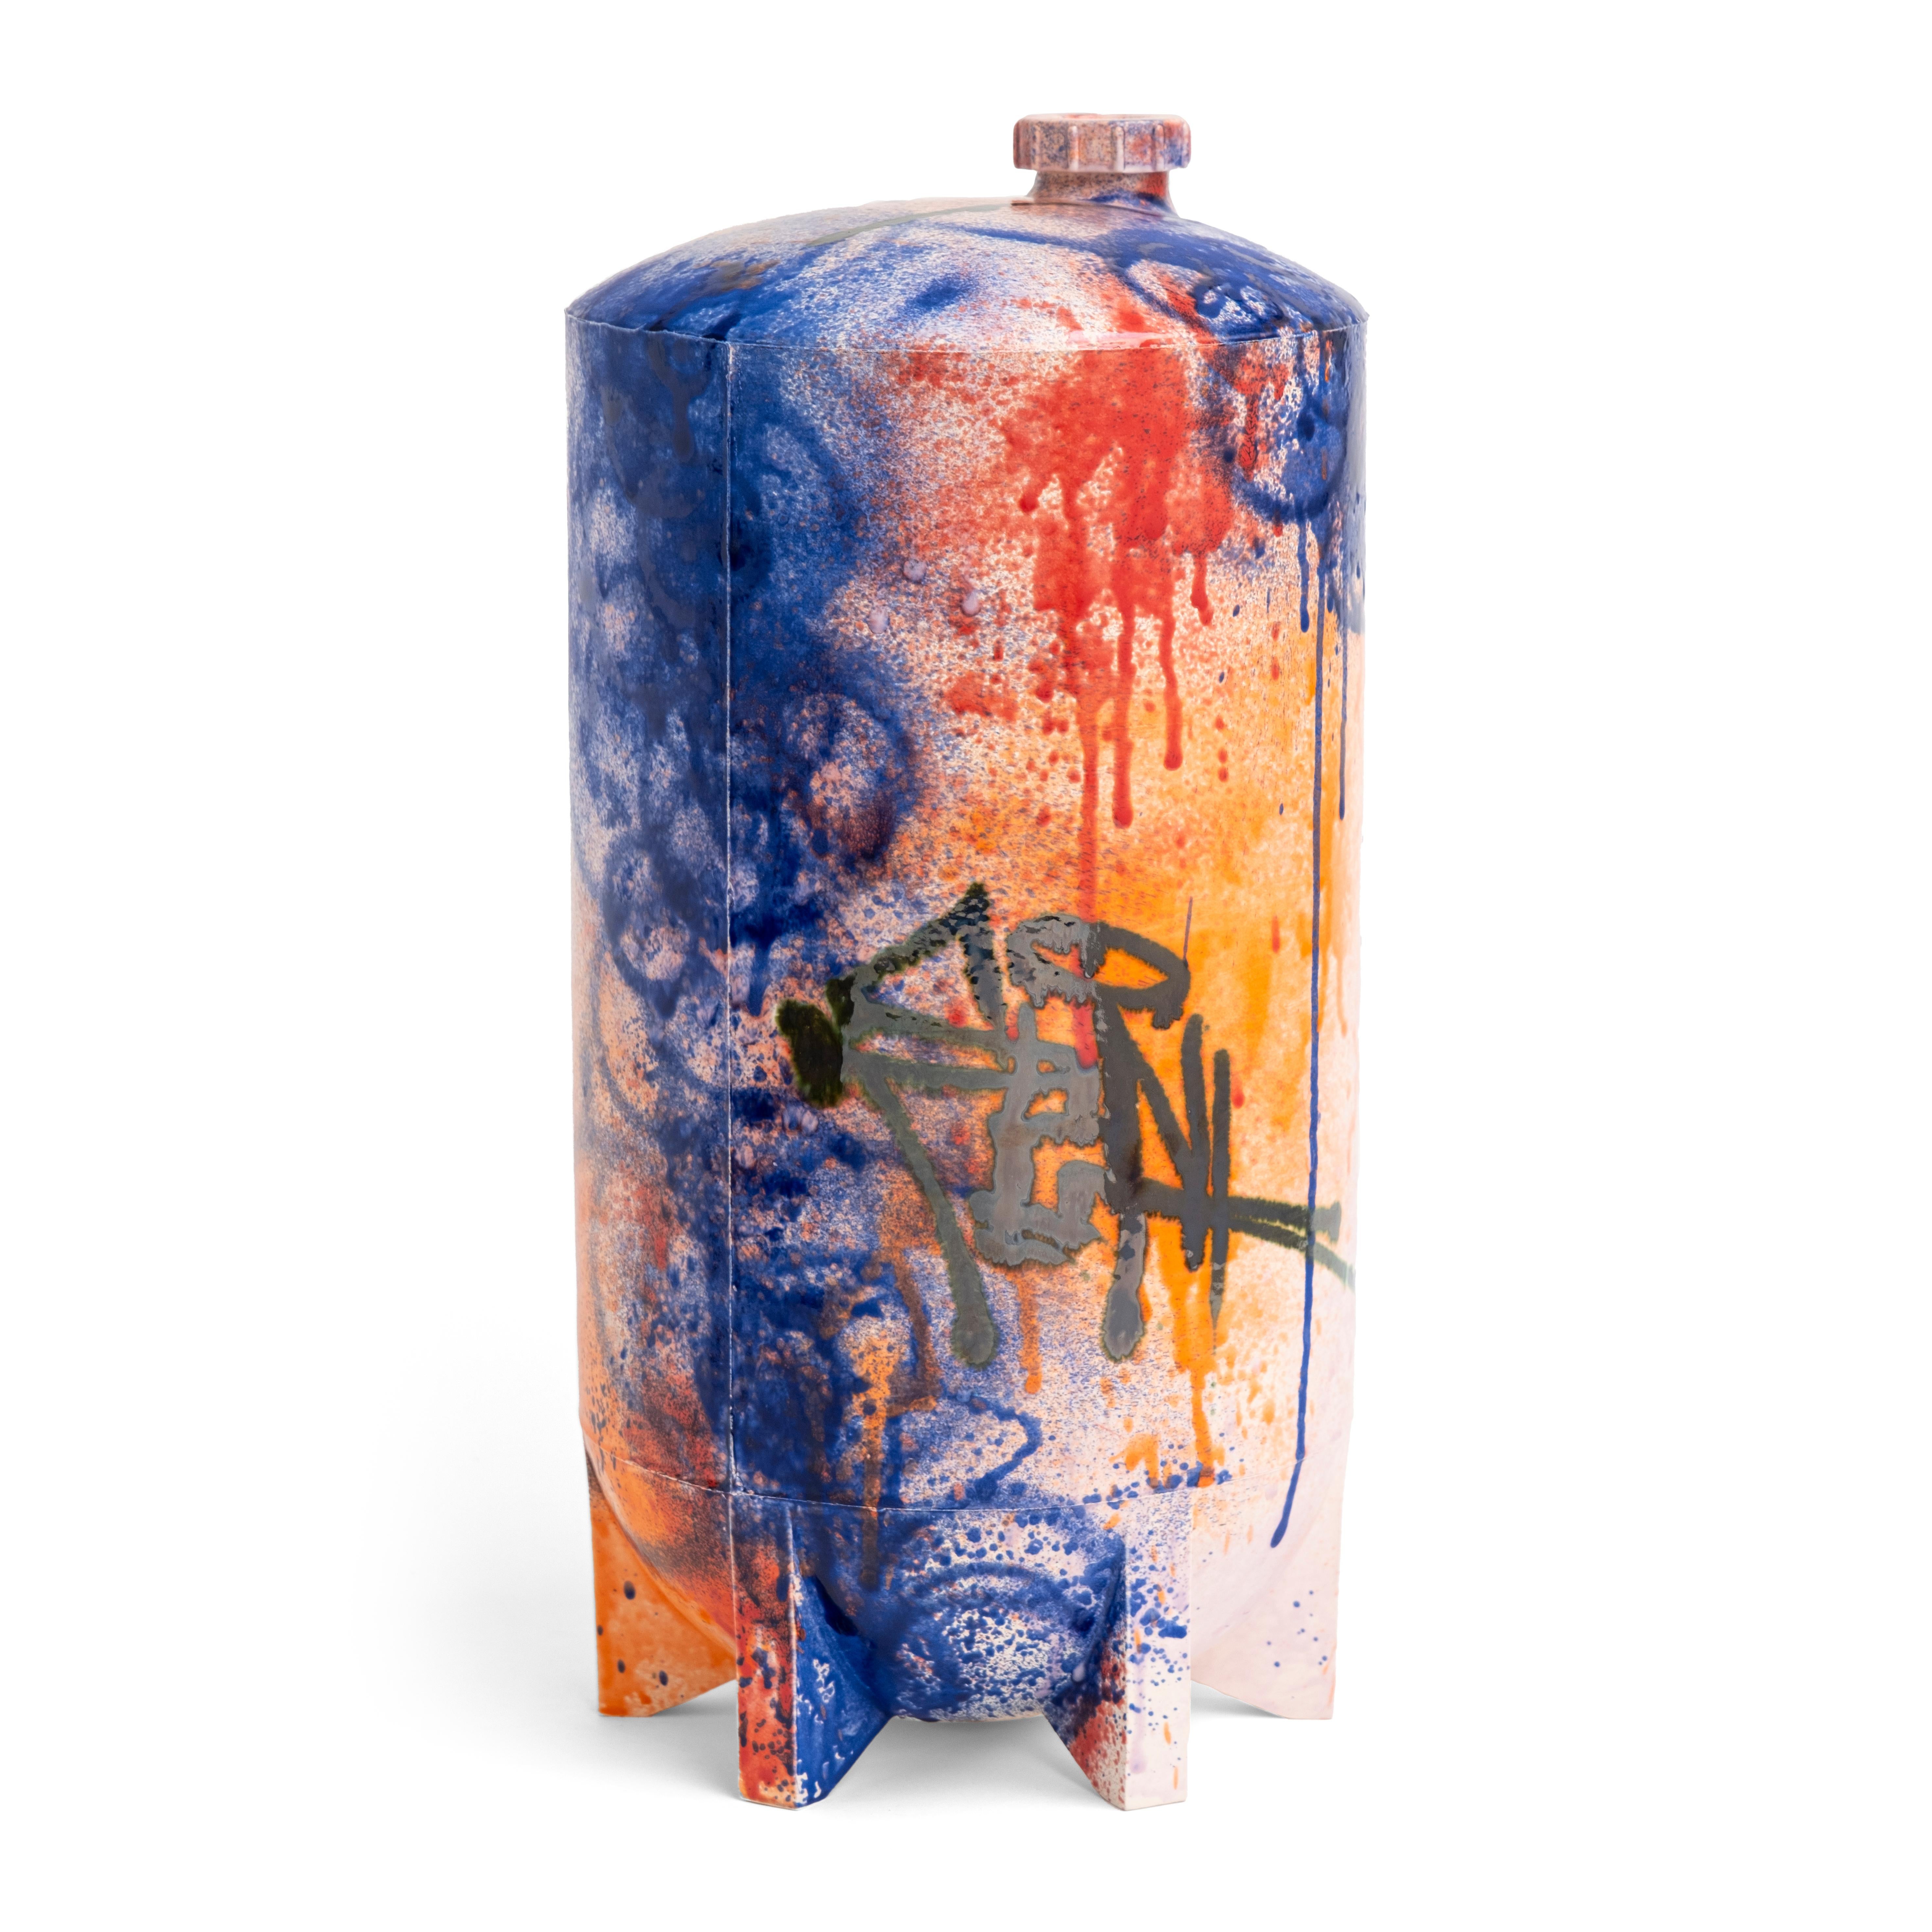 Under Pressure 7 by Yuri van Poppel.
Dimensions: D 27 x H 55 cm.
One of a kind.
Material: earthenware, layered ceramic glazes, various colours.
Handmade and spray-painted by hand by SunkOne. Removable lid.

Everlasting graffiti spray-painted